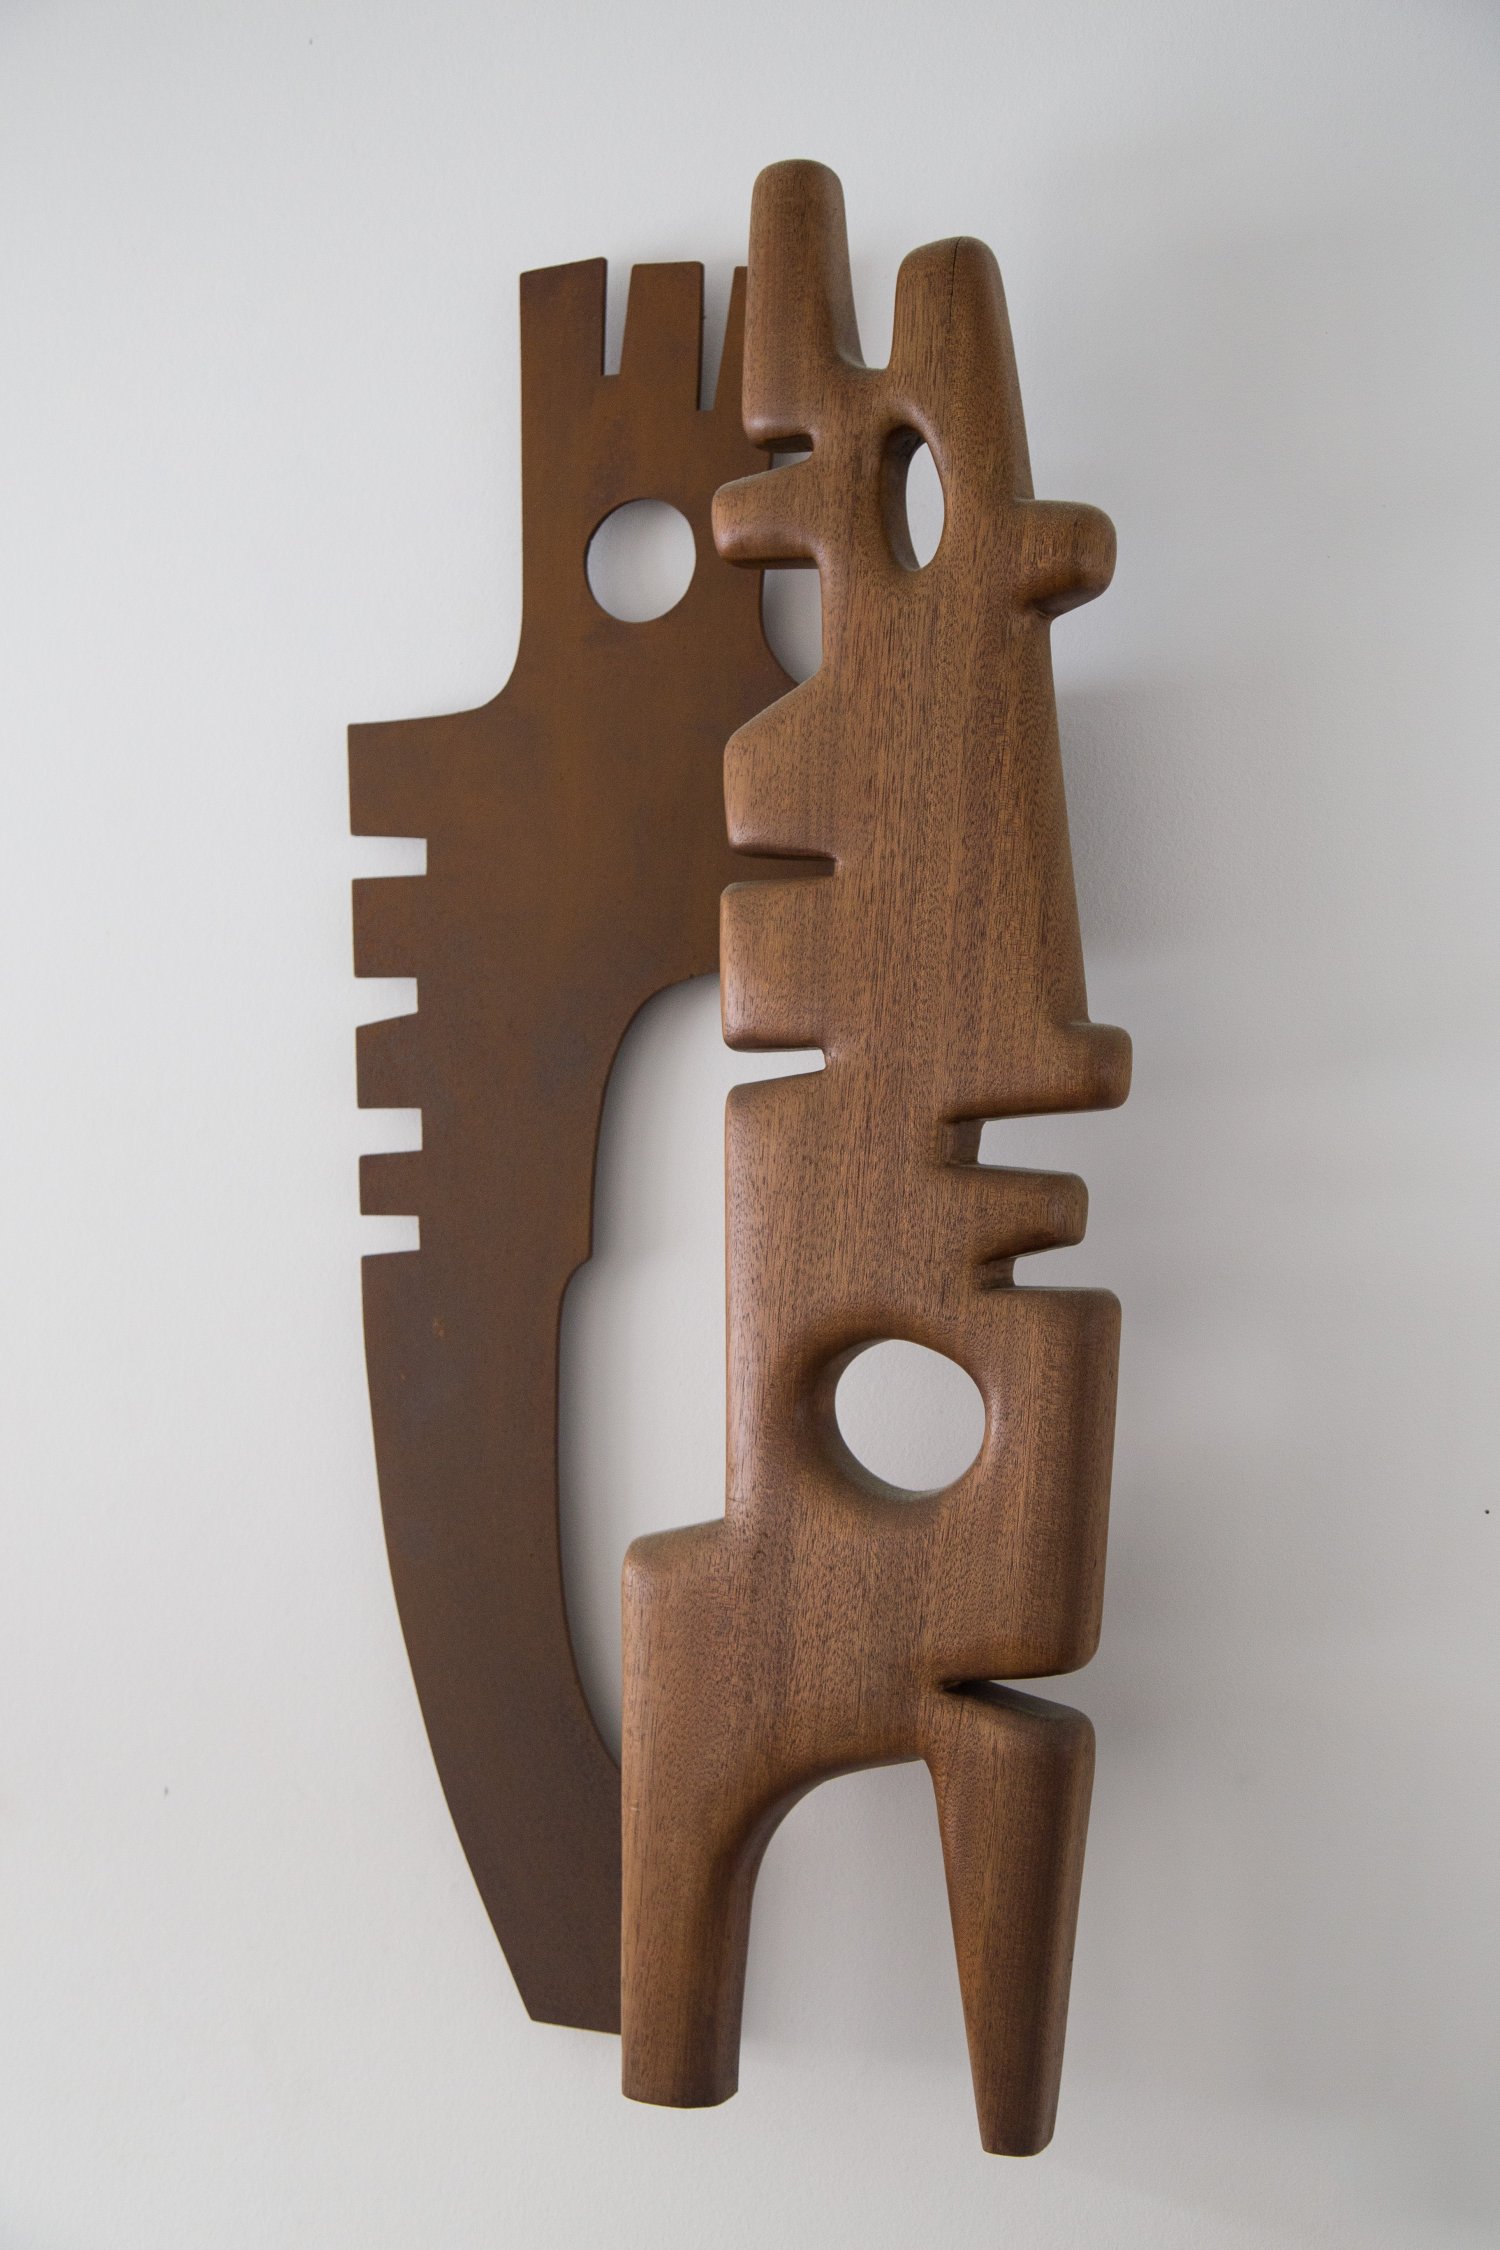 Unknown 1950's sculpture in wood and steel.